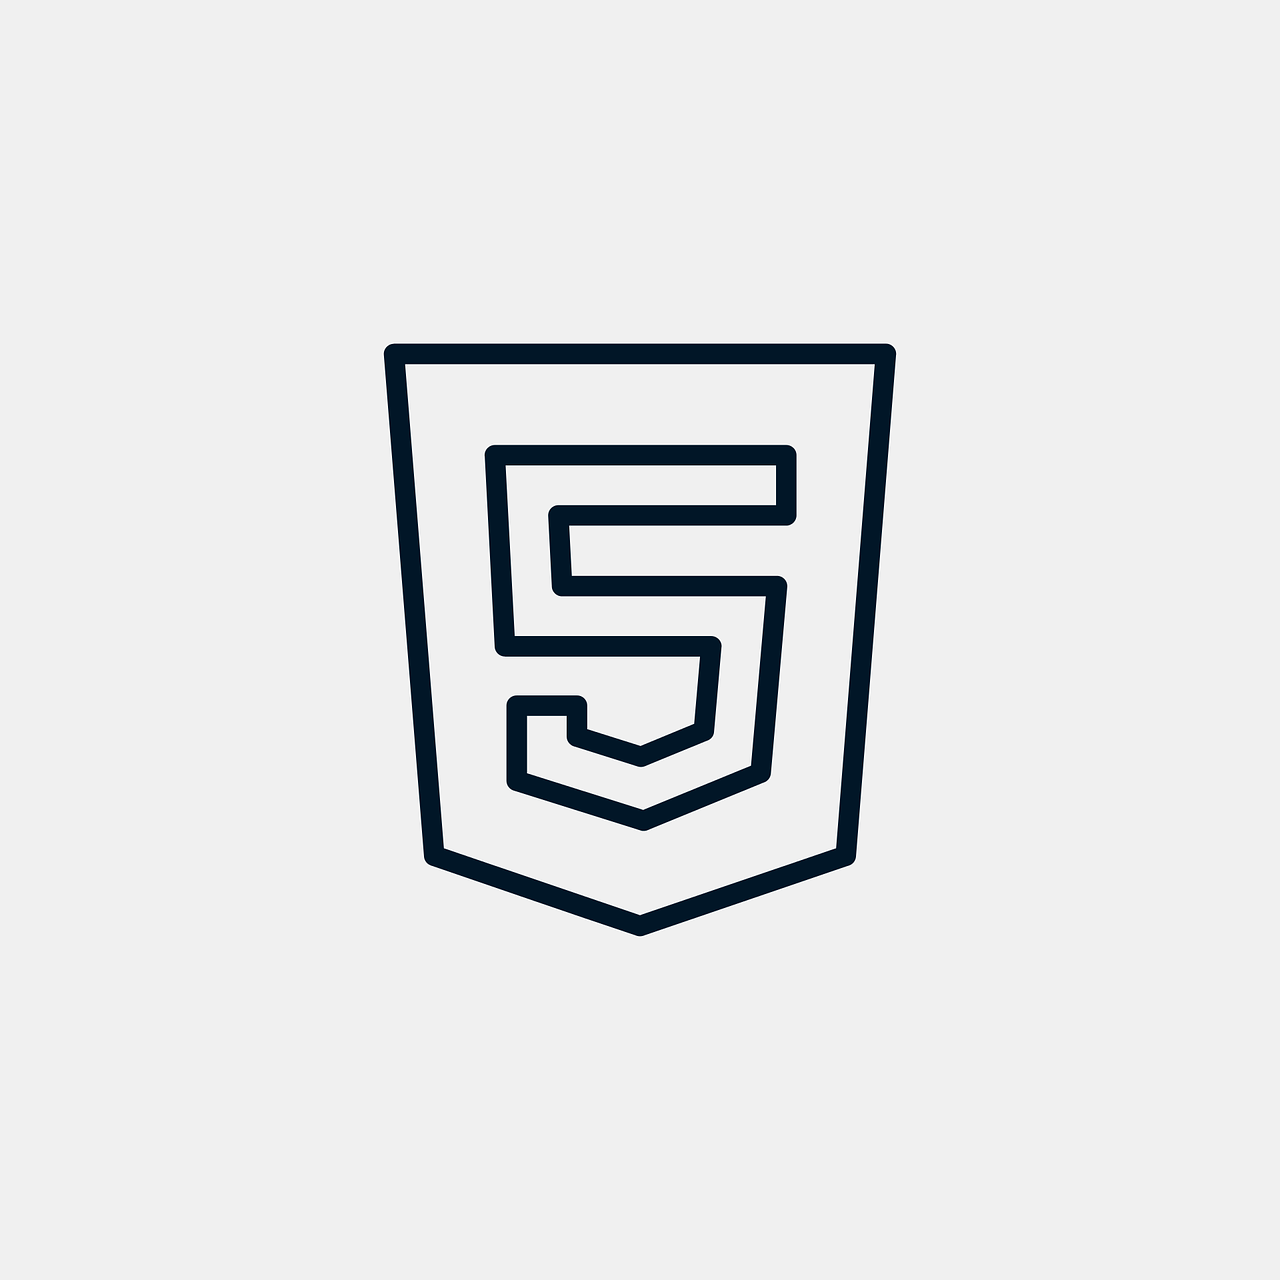 a logo with the letter e inside of it, a wireframe diagram, by Matt Cavotta, behance, superflat, shield design, 5 years old, javascript enabled, 2 d vector logo